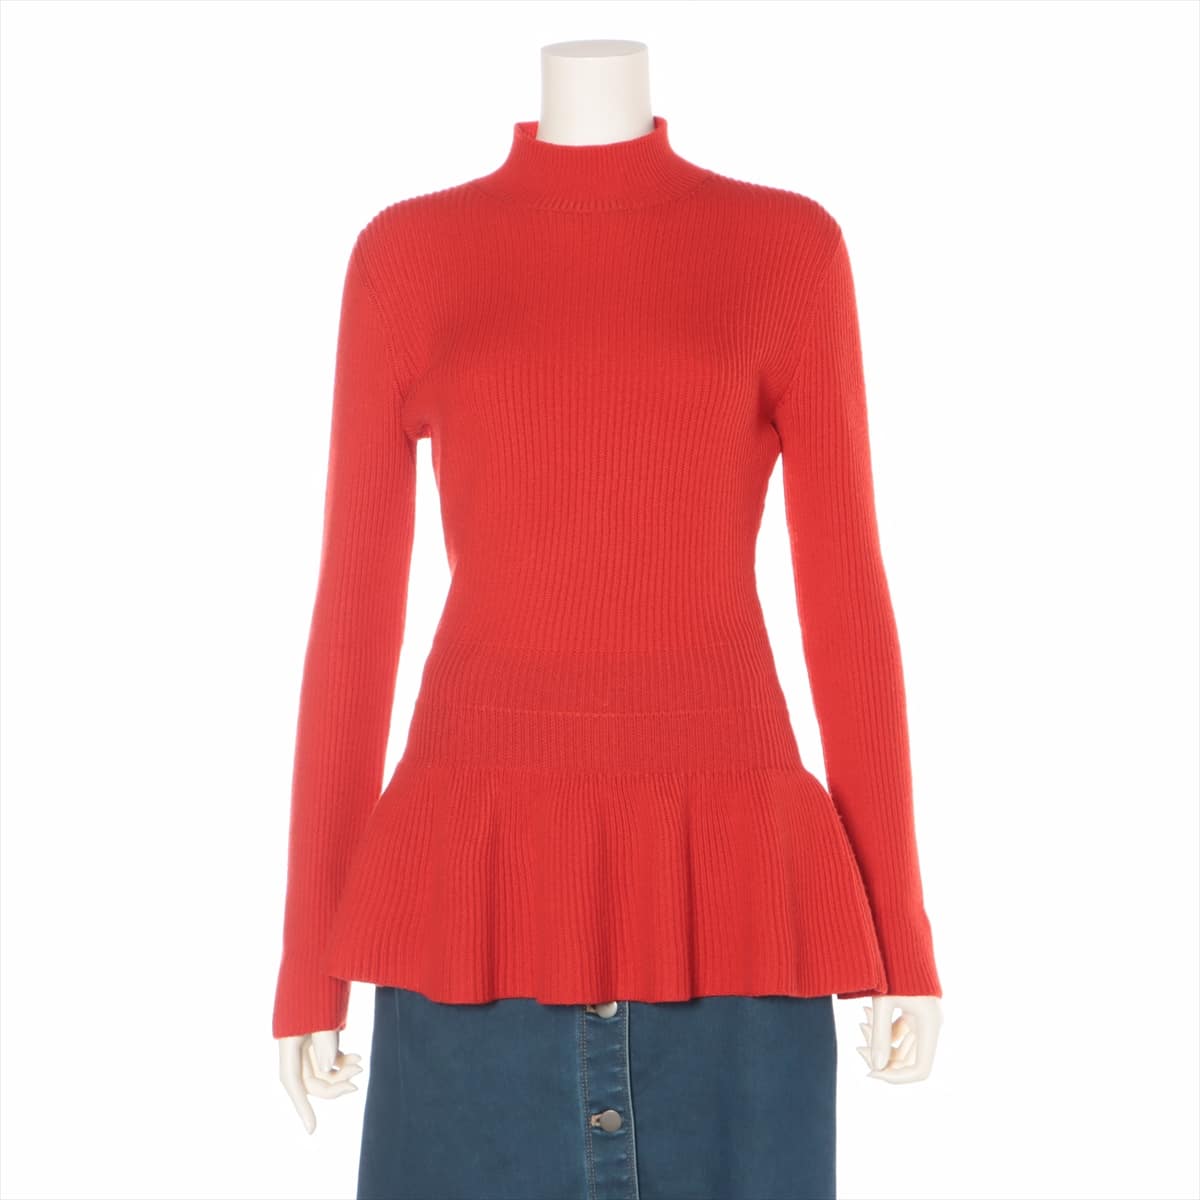 Christian Dior Wool Knit 38 Ladies' Red